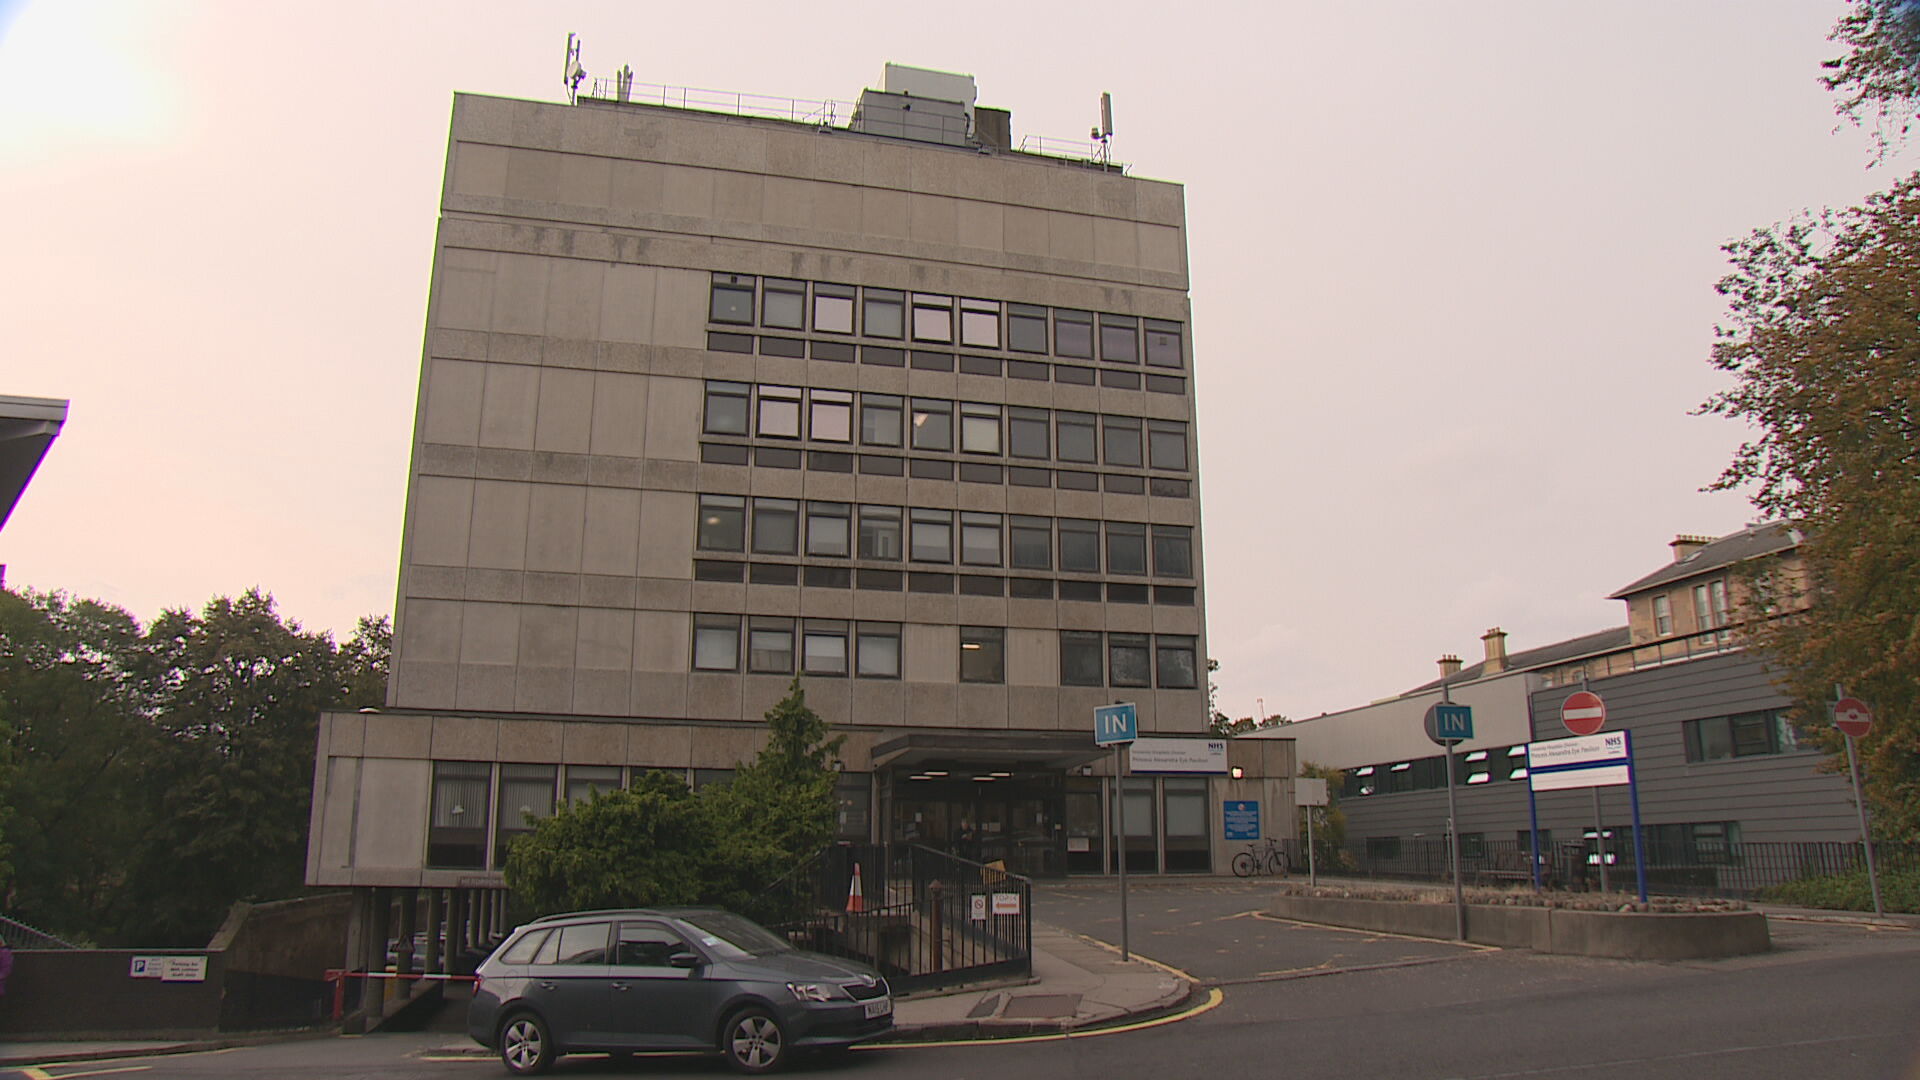 The current eye hospital building was deemed 'not fit for purpose' in 2014